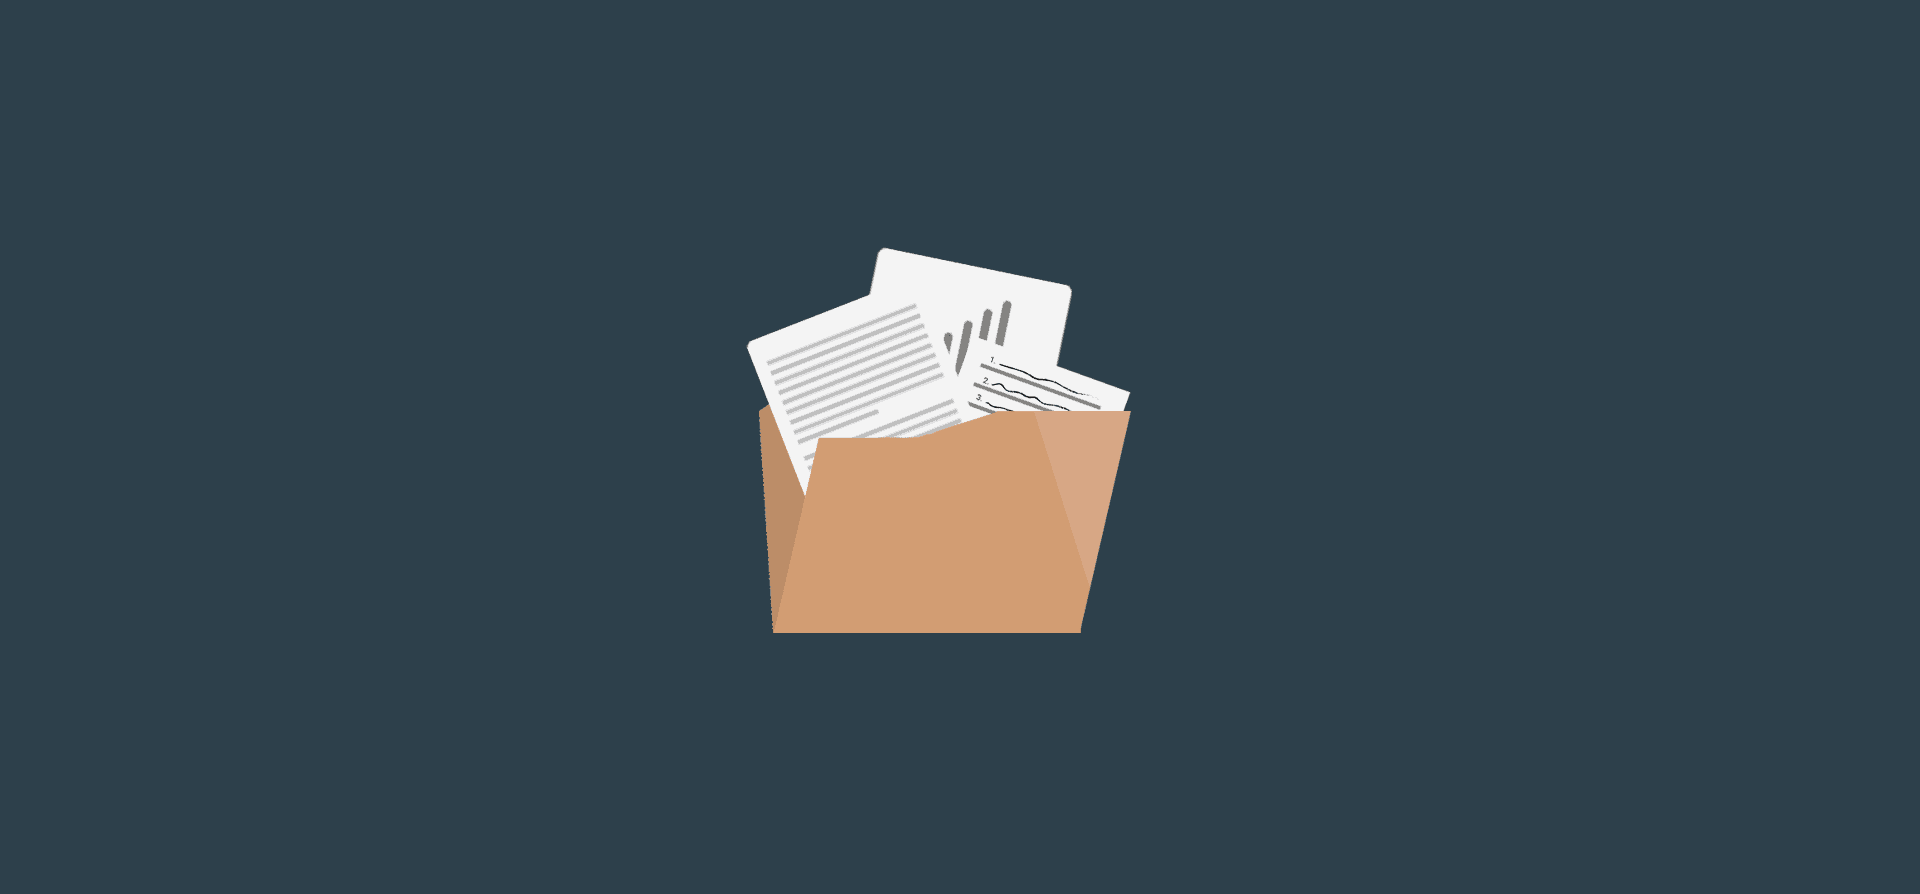 A folder holding three sheets of paper representing project management reports